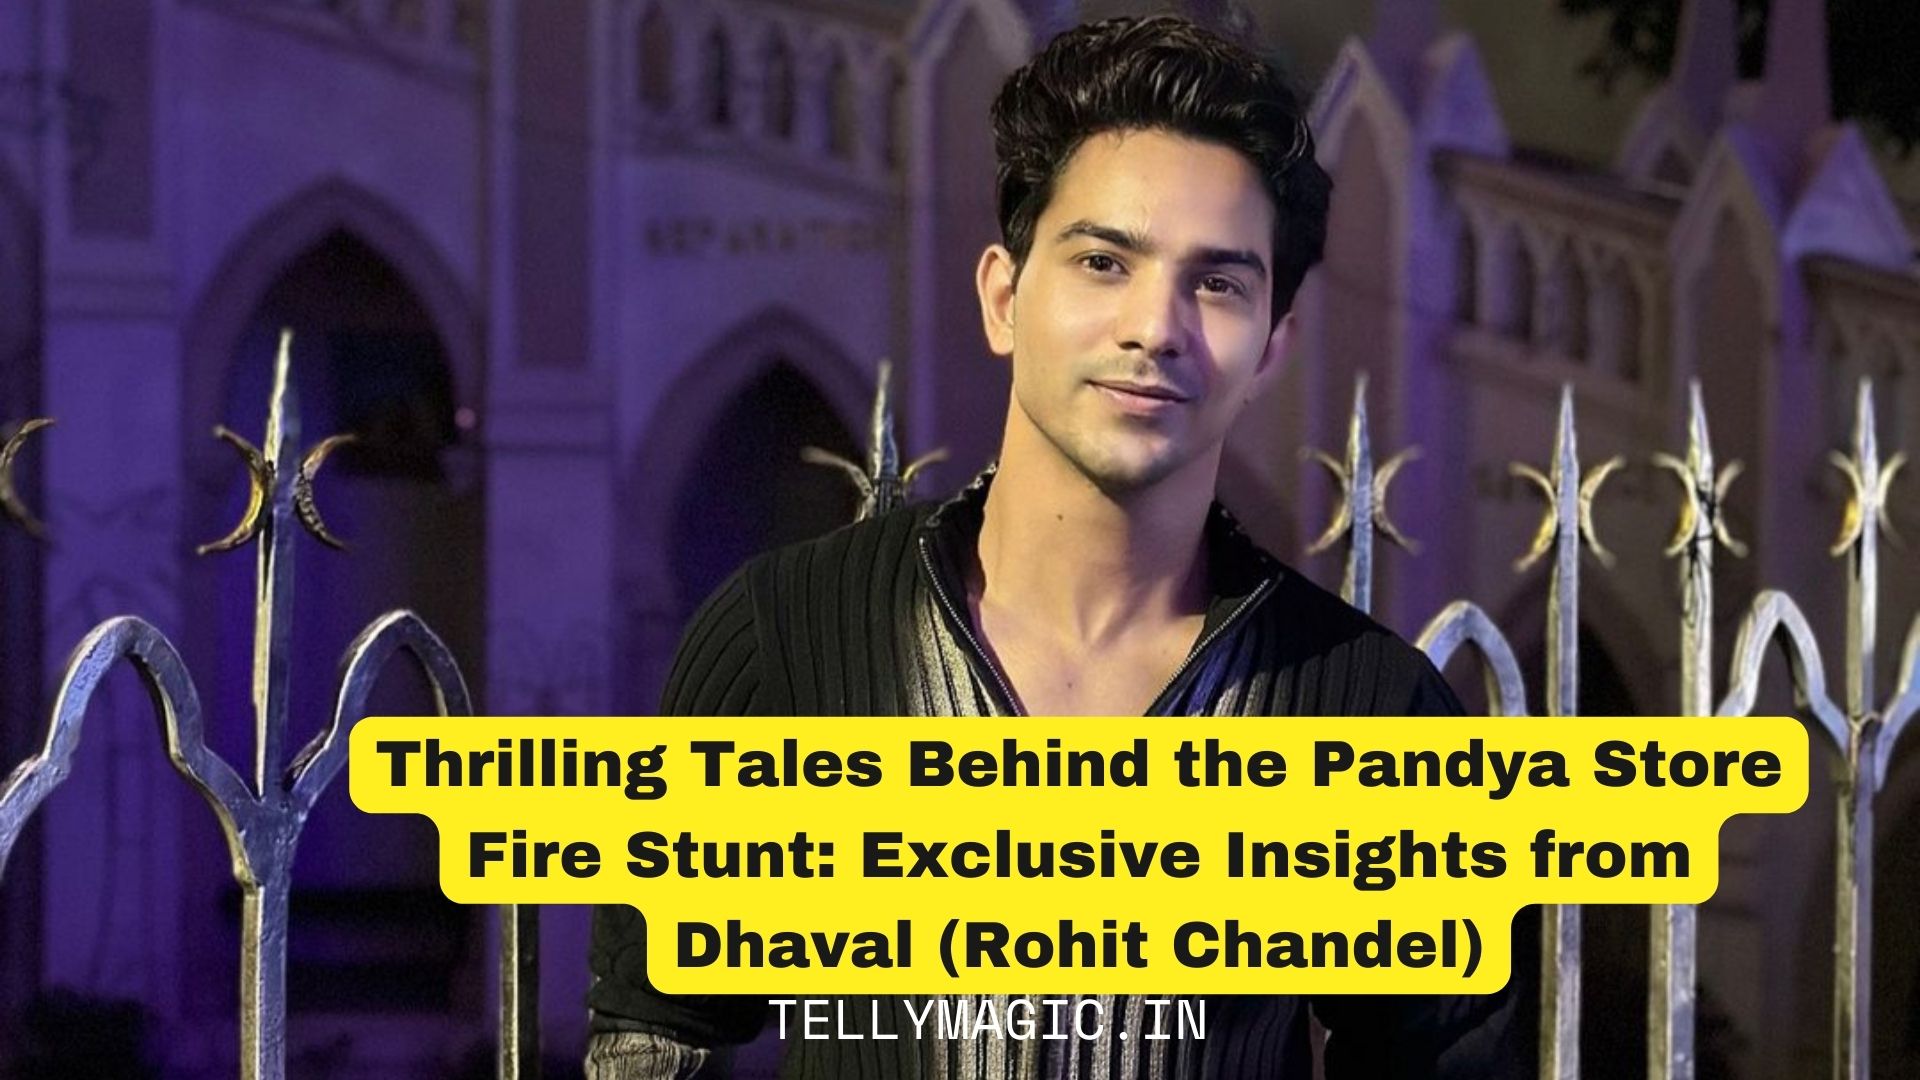 Thrilling Tales Behind the Pandya Store Fire Stunt: Exclusive Insights from Dhaval (Rohit Chandel)